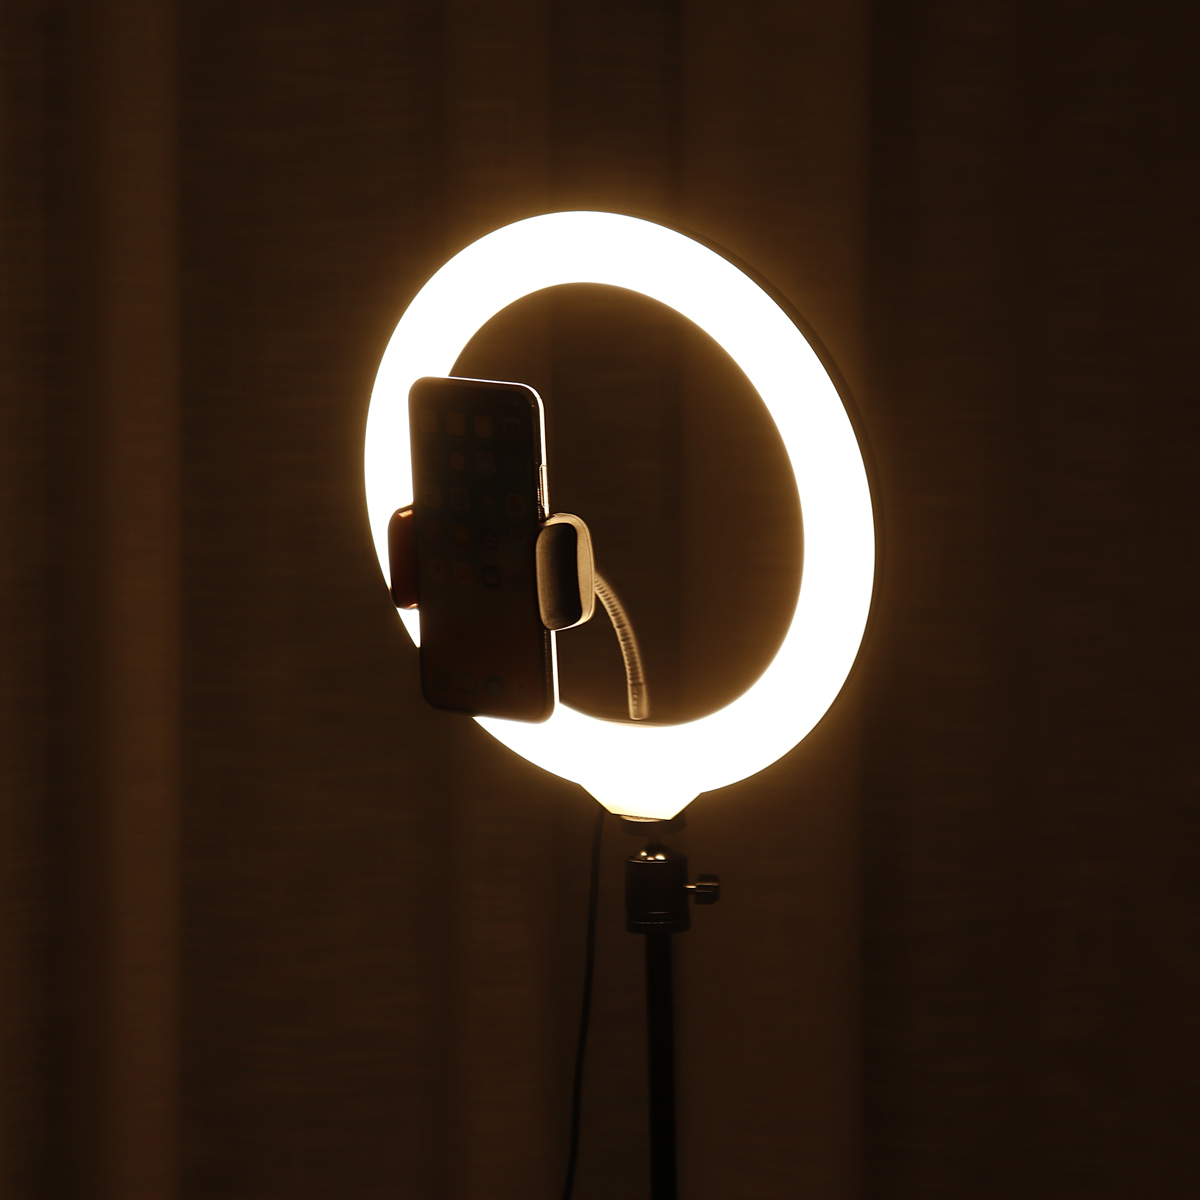 Bakeey-10inch-LED-Ring-Light-Portable-Telescopic-Tripod-Fill-Light-Dimmable-Flexible-Stand-Phone-Hol-1746941-10